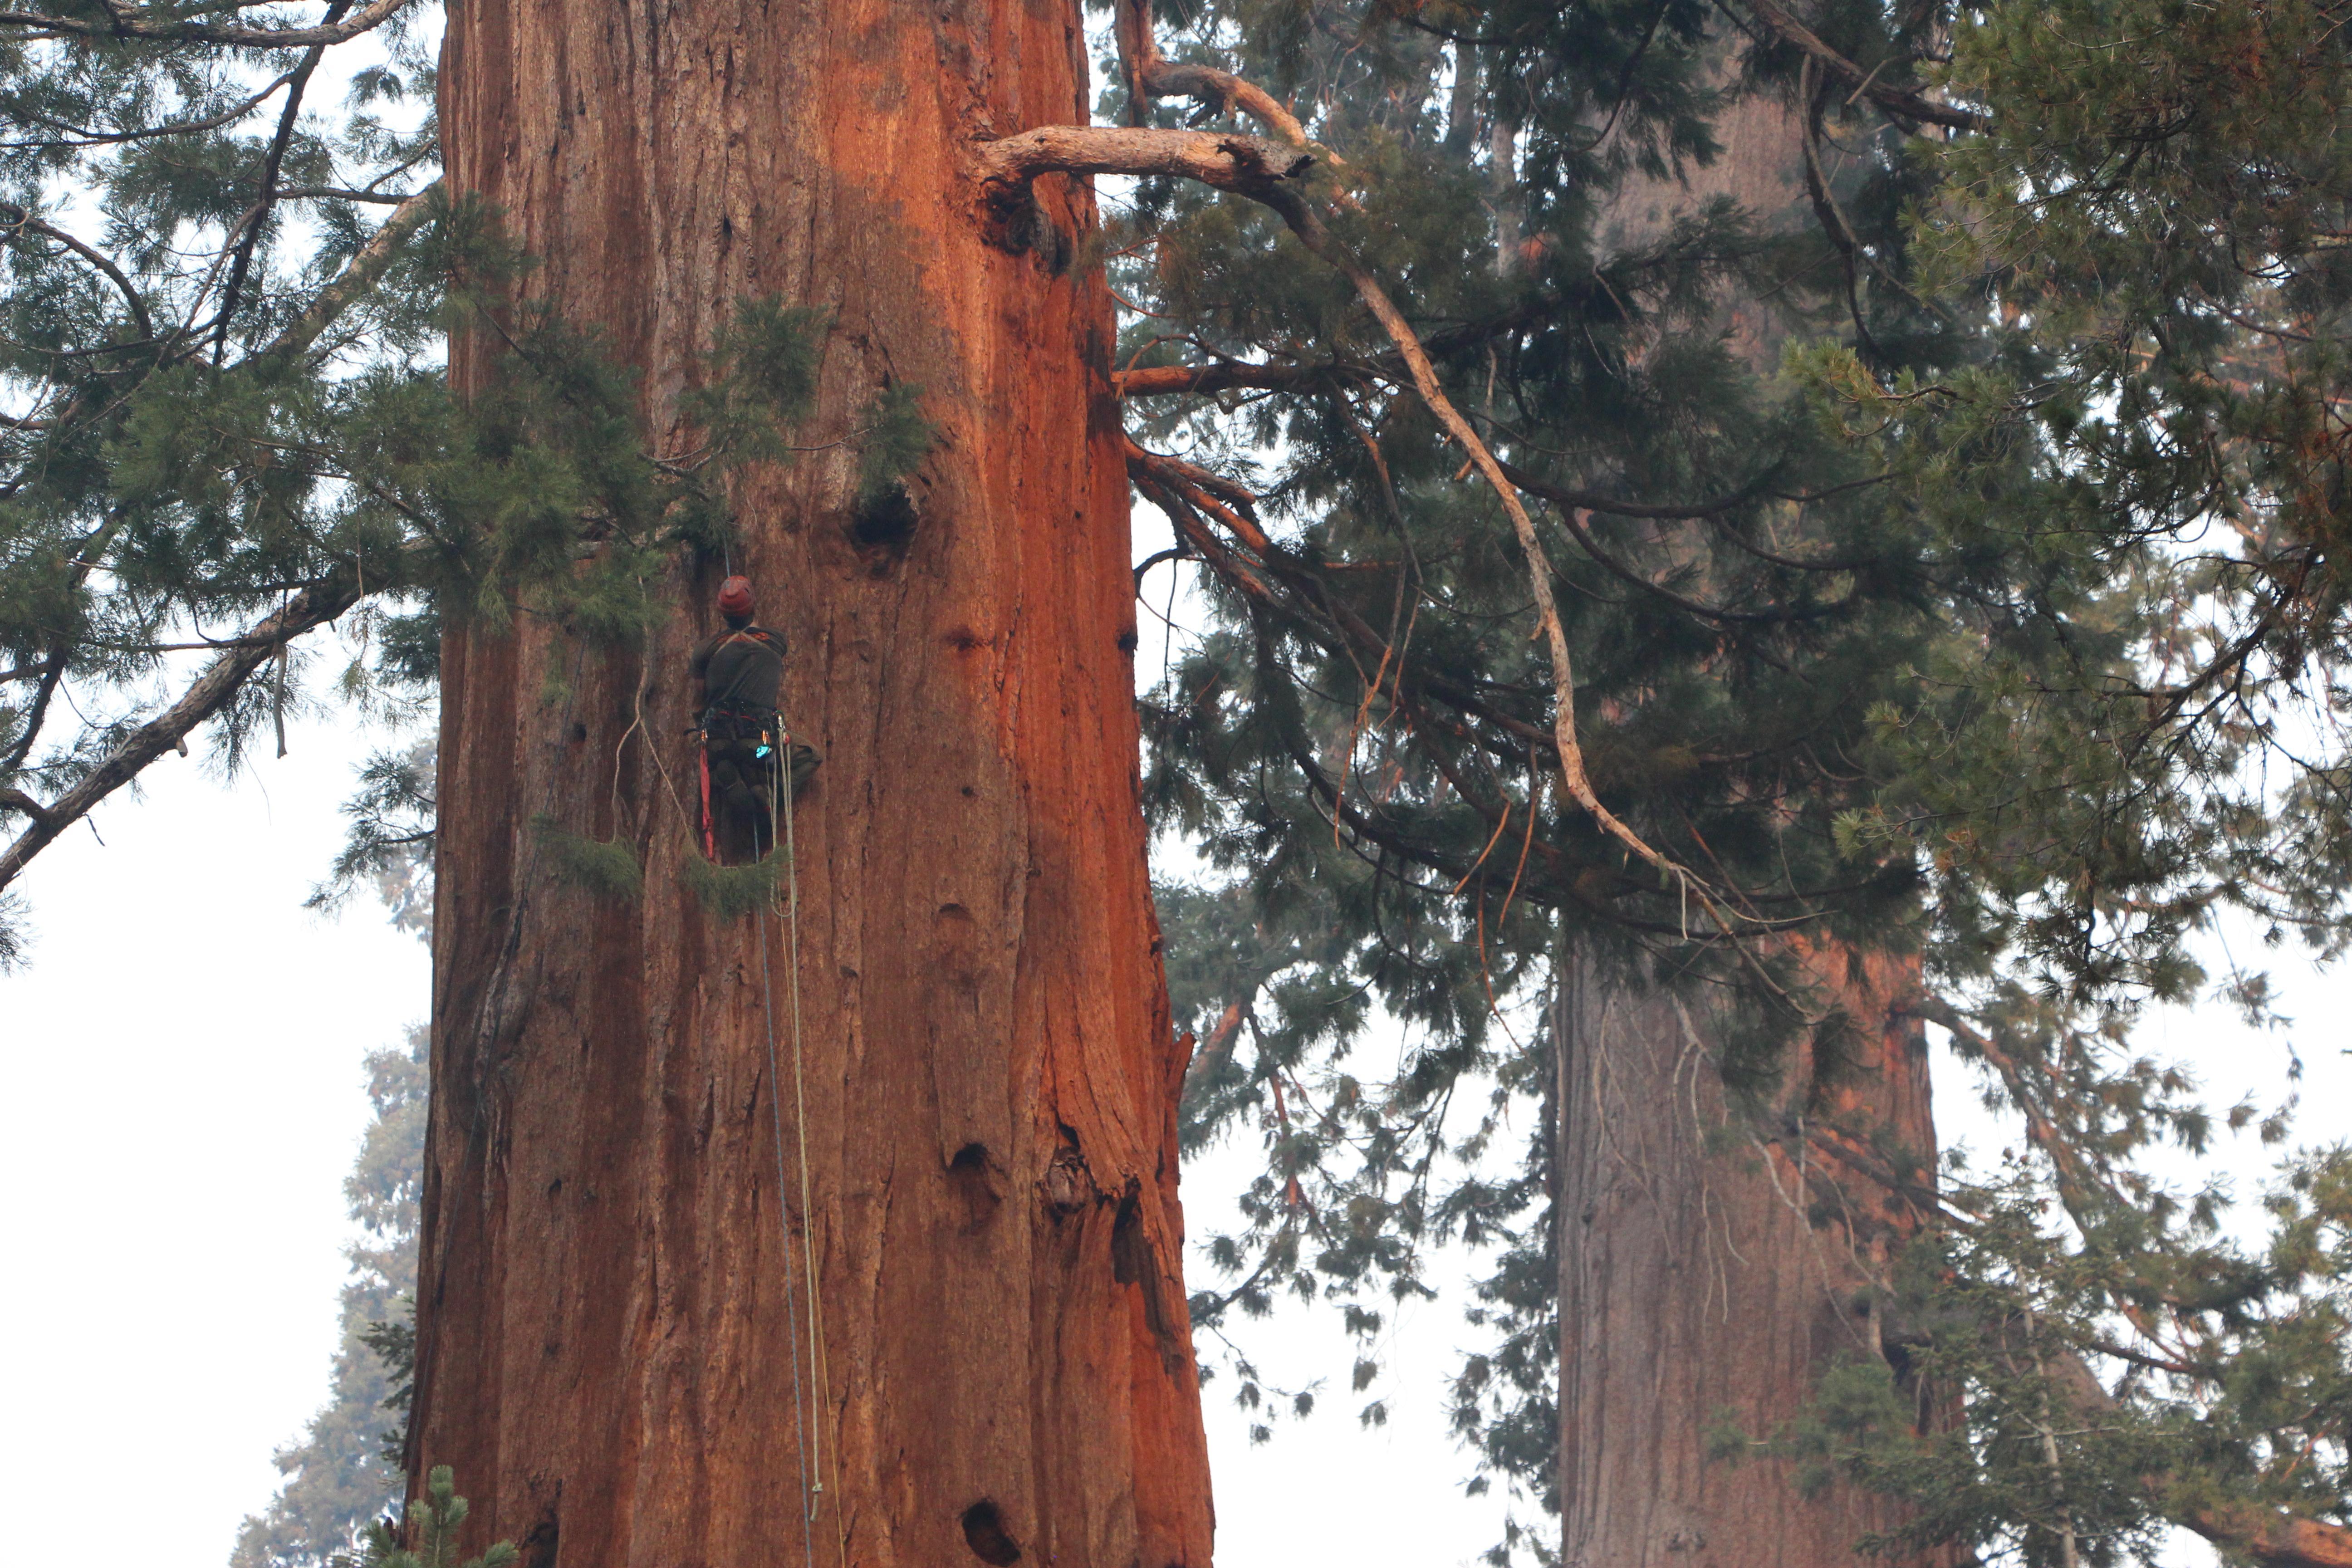 Photo of smokejumpers scouting and climbing giant Sequoia trees.